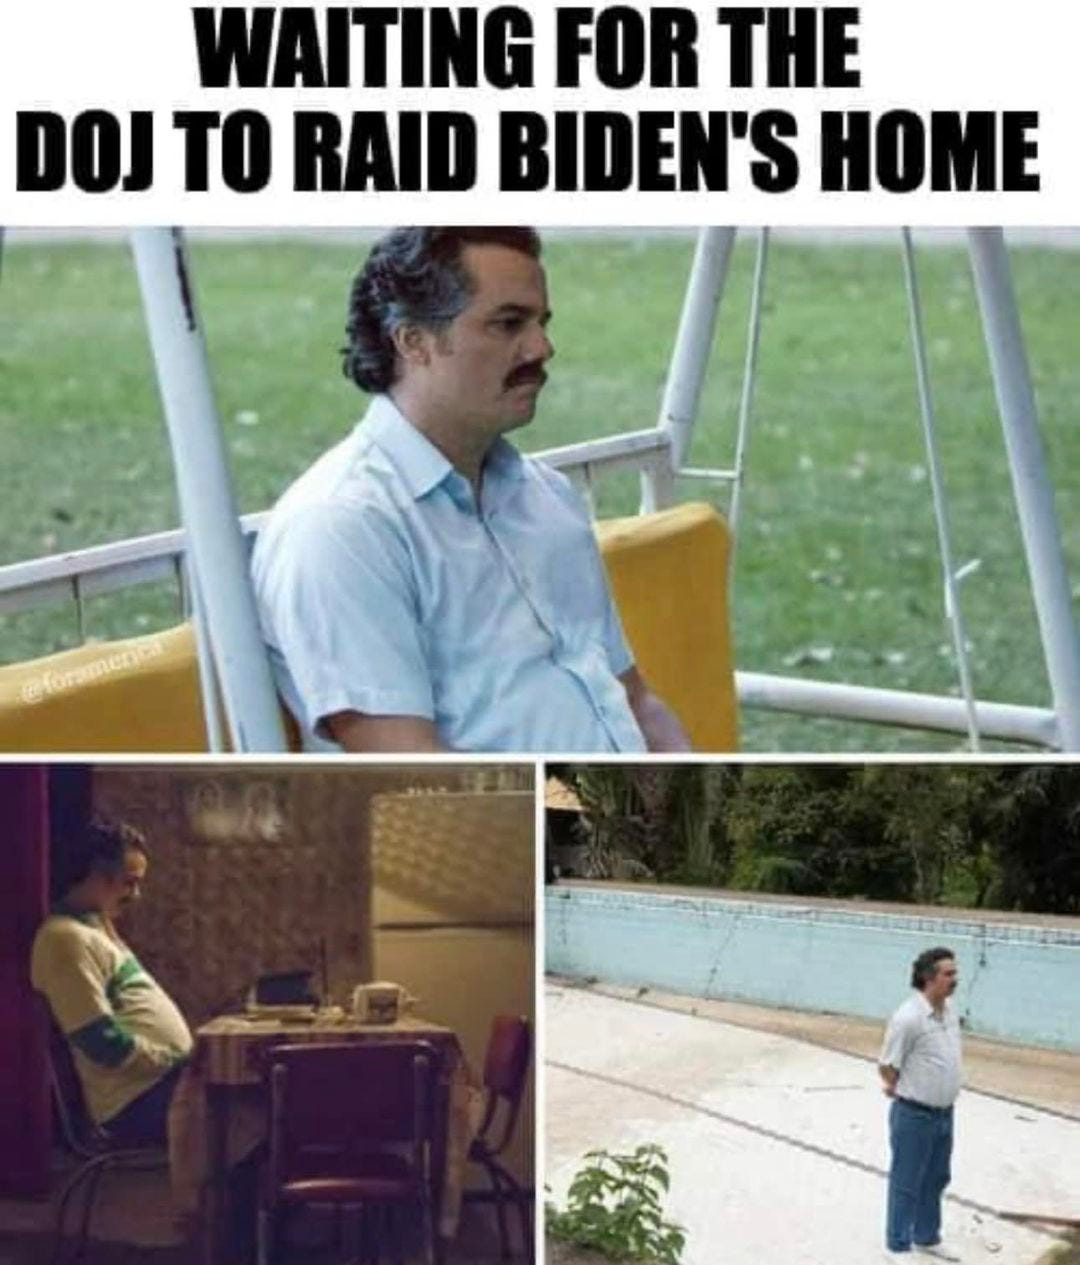 May be a meme of 3 people and text that says 'WAITING FOR THE DOJ TO RAID BIDEN'S HOME'